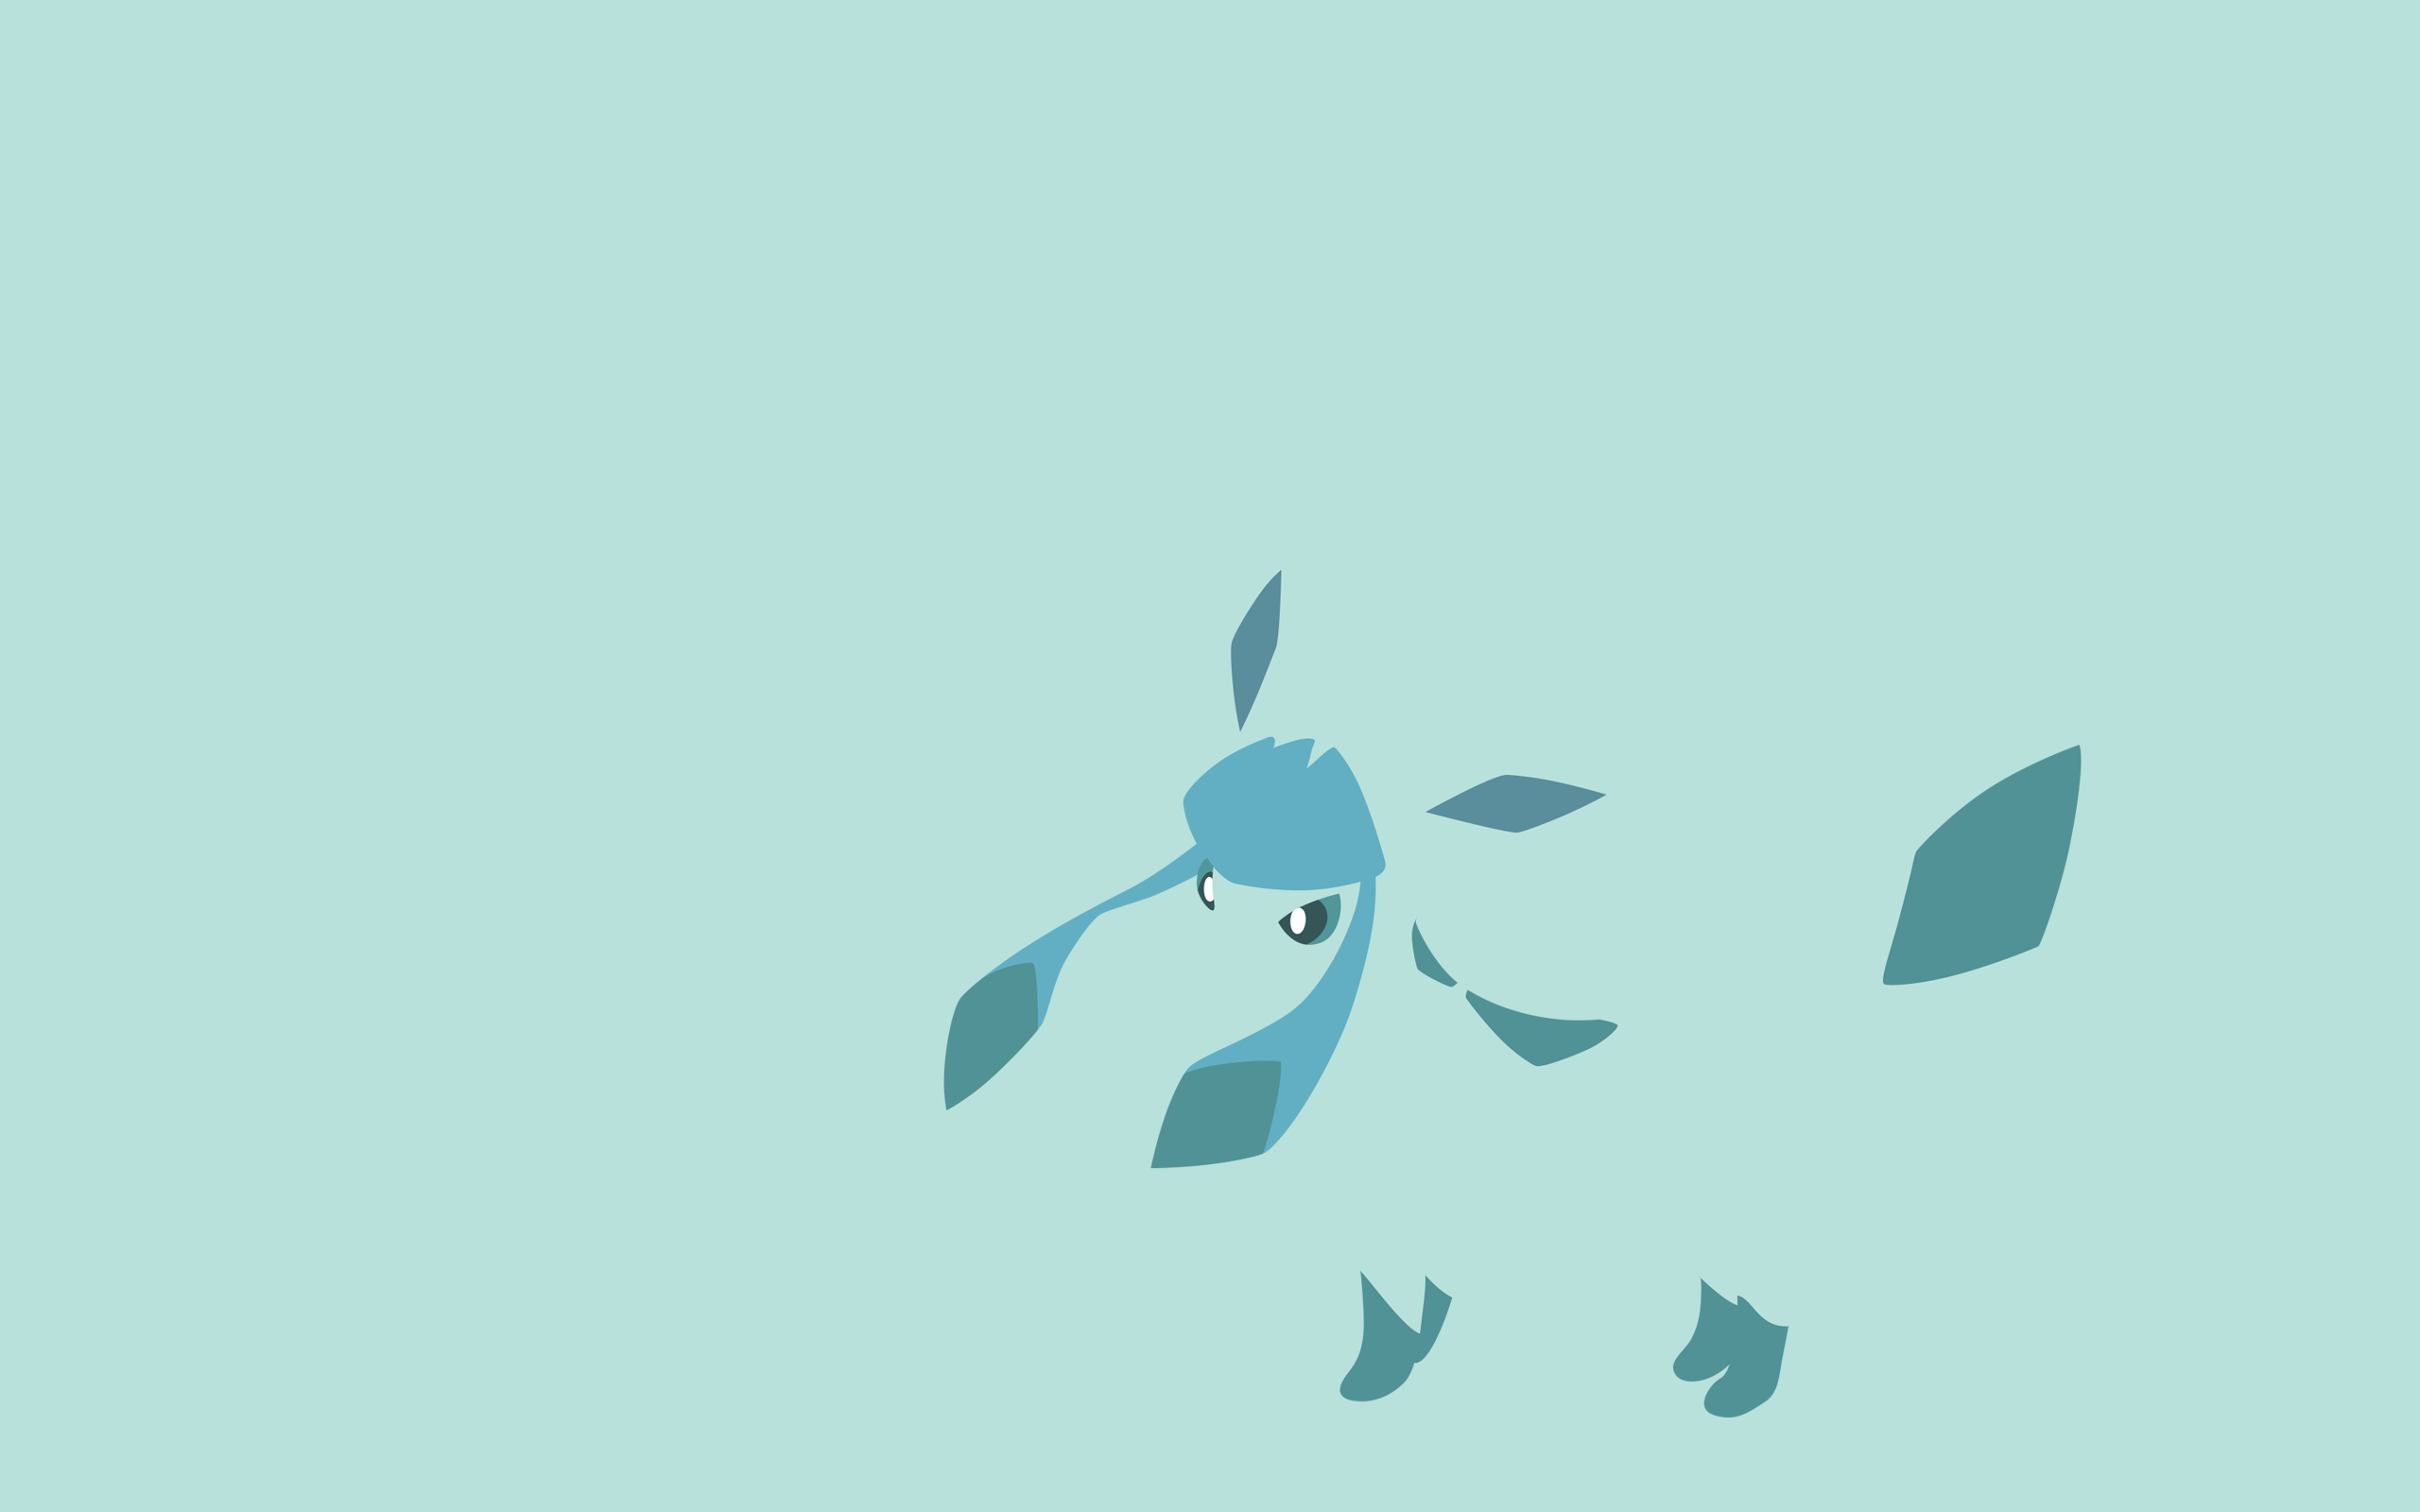 Glaceon Wallpaper 47879 2560x1600 px